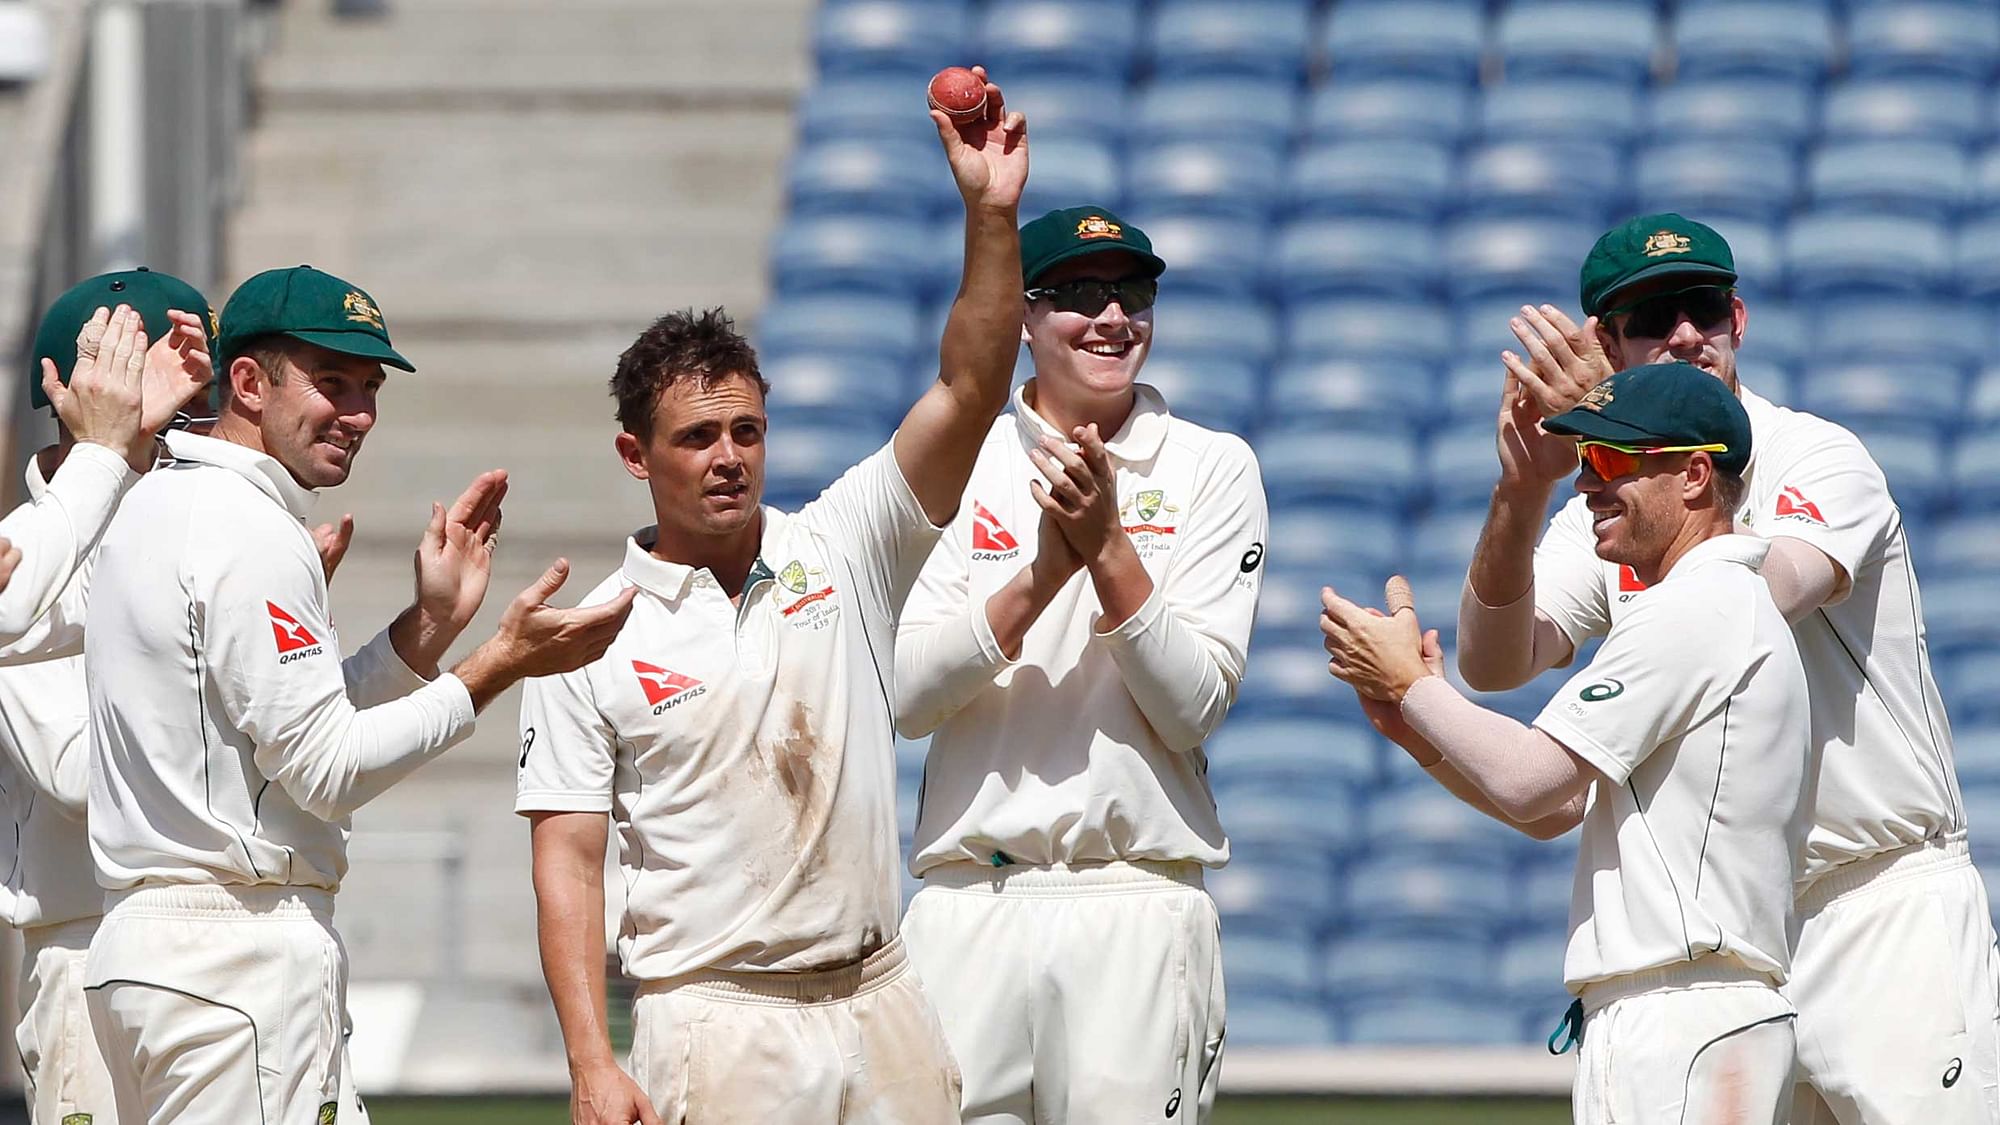 After his 12 wickets in Pune, O’Keefe has managed to pick just 6 wickets in two tests. (Photo: BCCI)